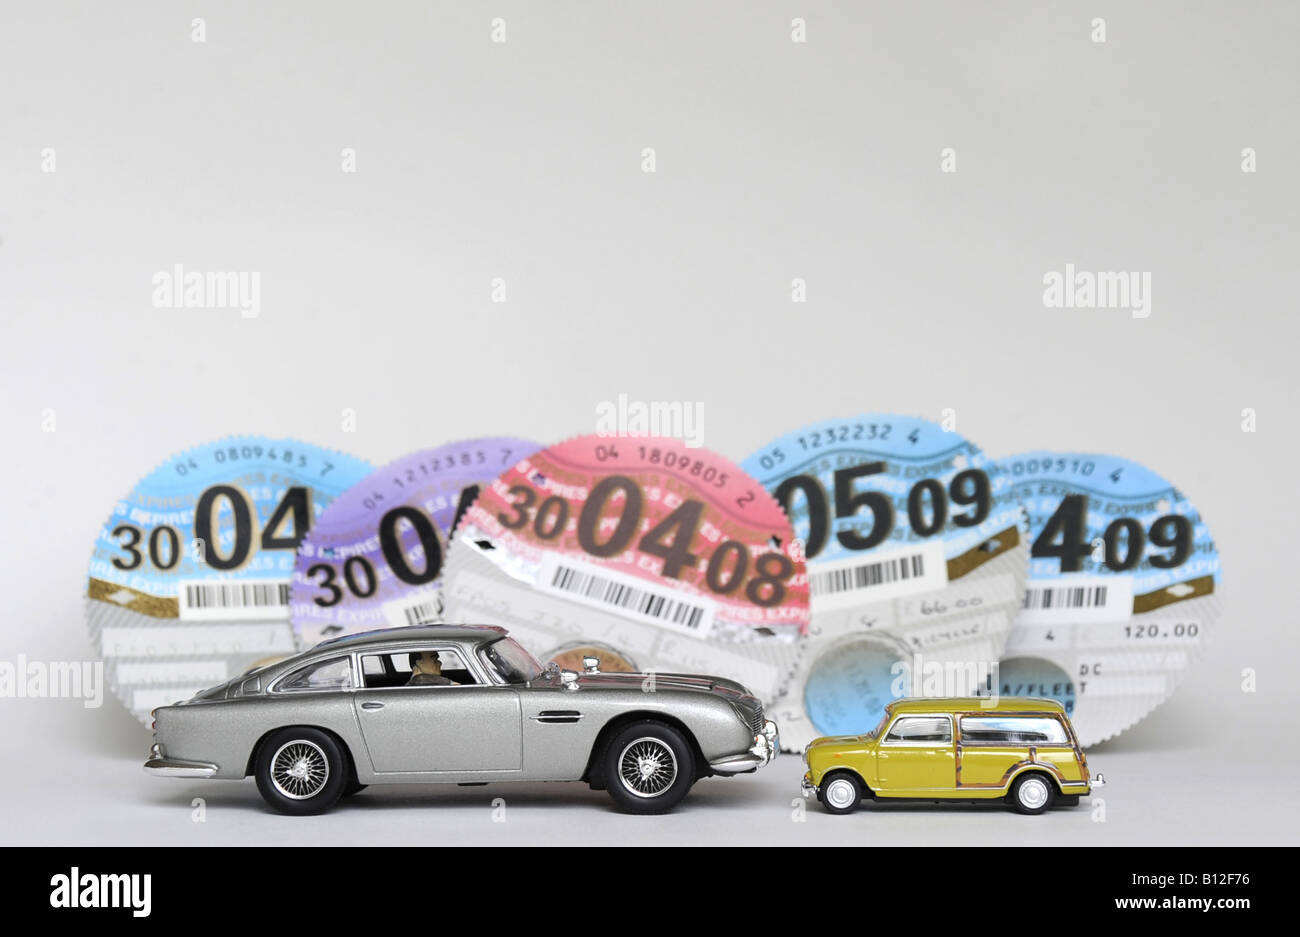 LUXURY LARGE AND ECONOMY SMALL CARS WITH BRITISH TAX DISCS,UK. Stock Photo